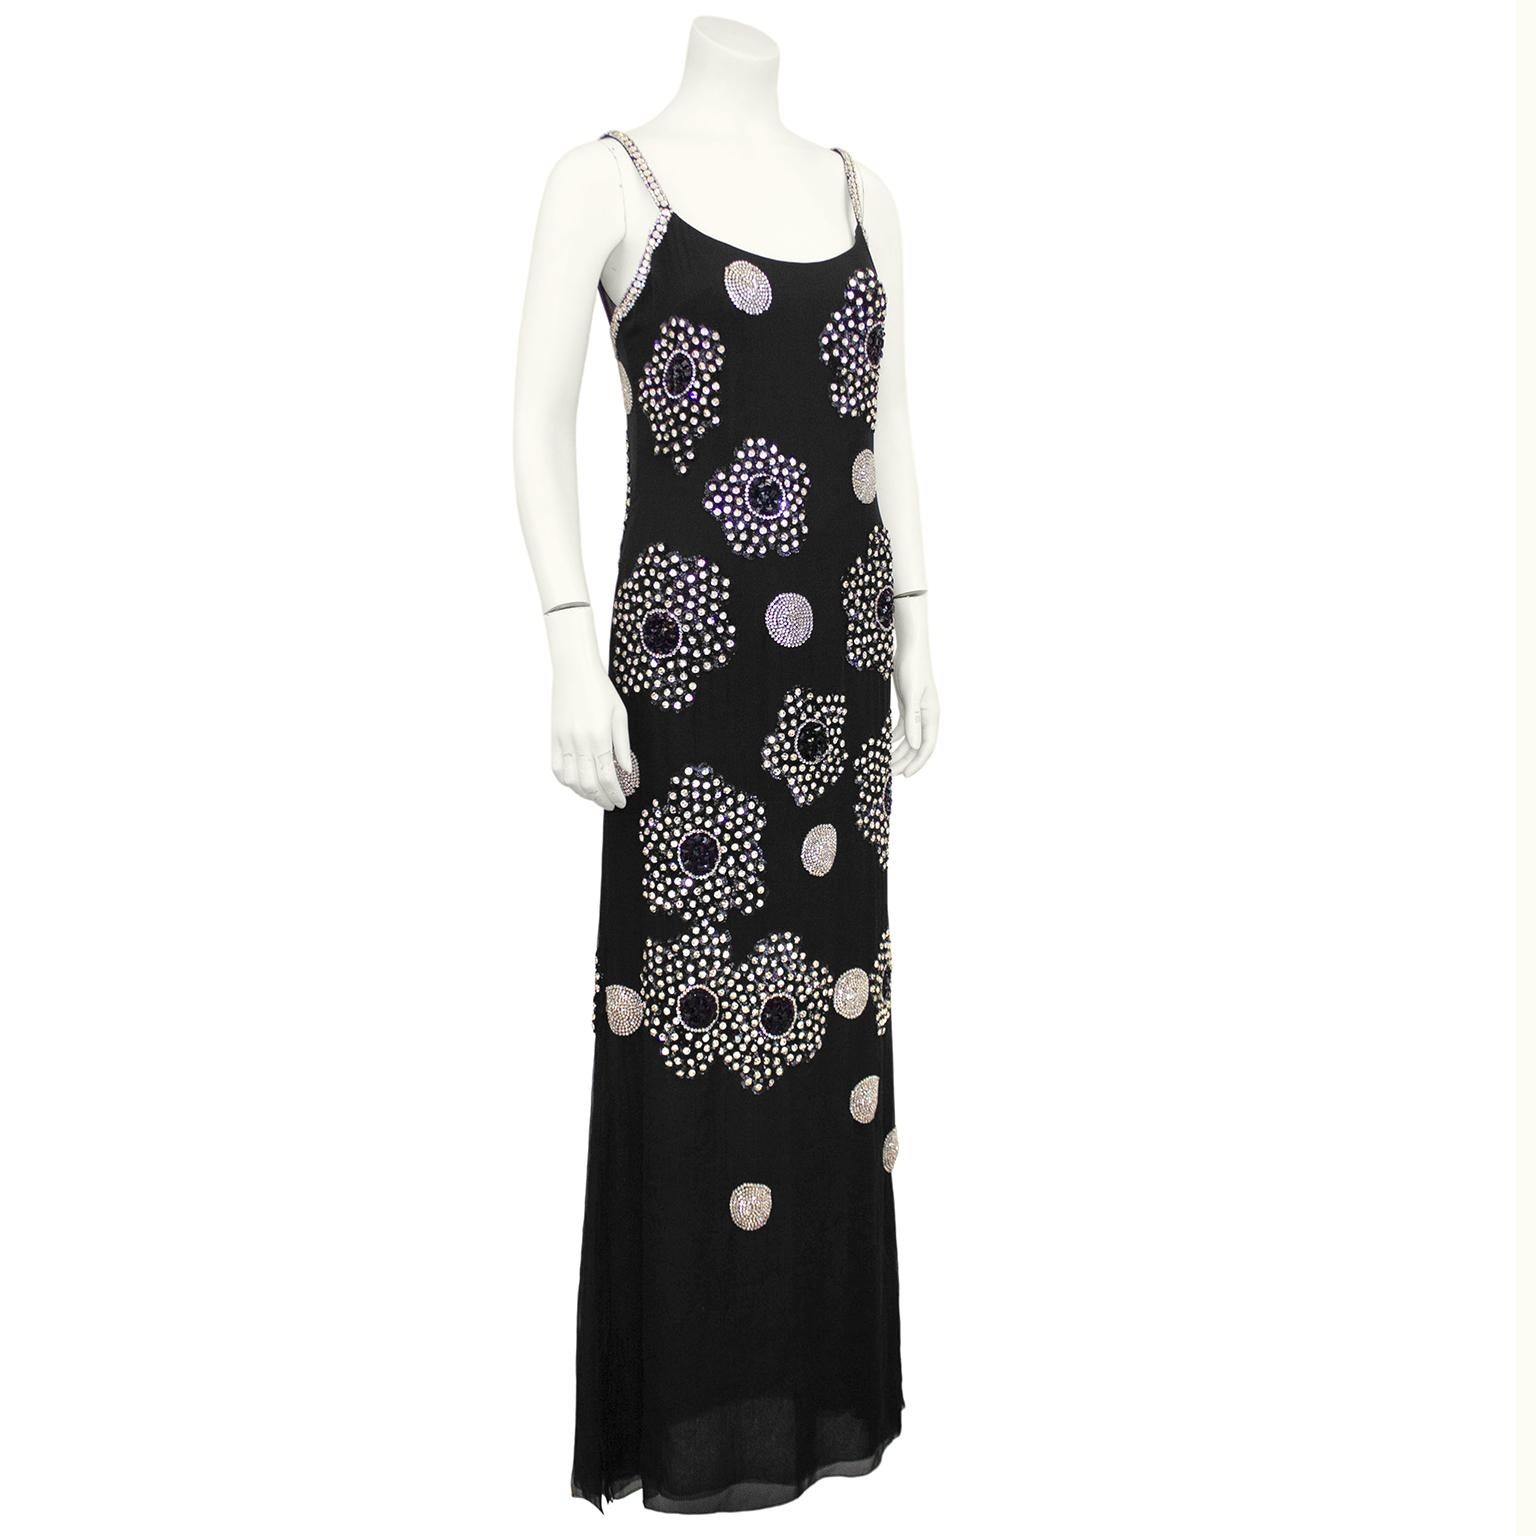 Couture James Galanos black silk chiffon and rhinestone slip style gown. Provenance from a well known 1960's celebrity singer. Very gently worn with only minimal, hard to detect bead loss. Chiffon in excellent condition. The label is Galanos for